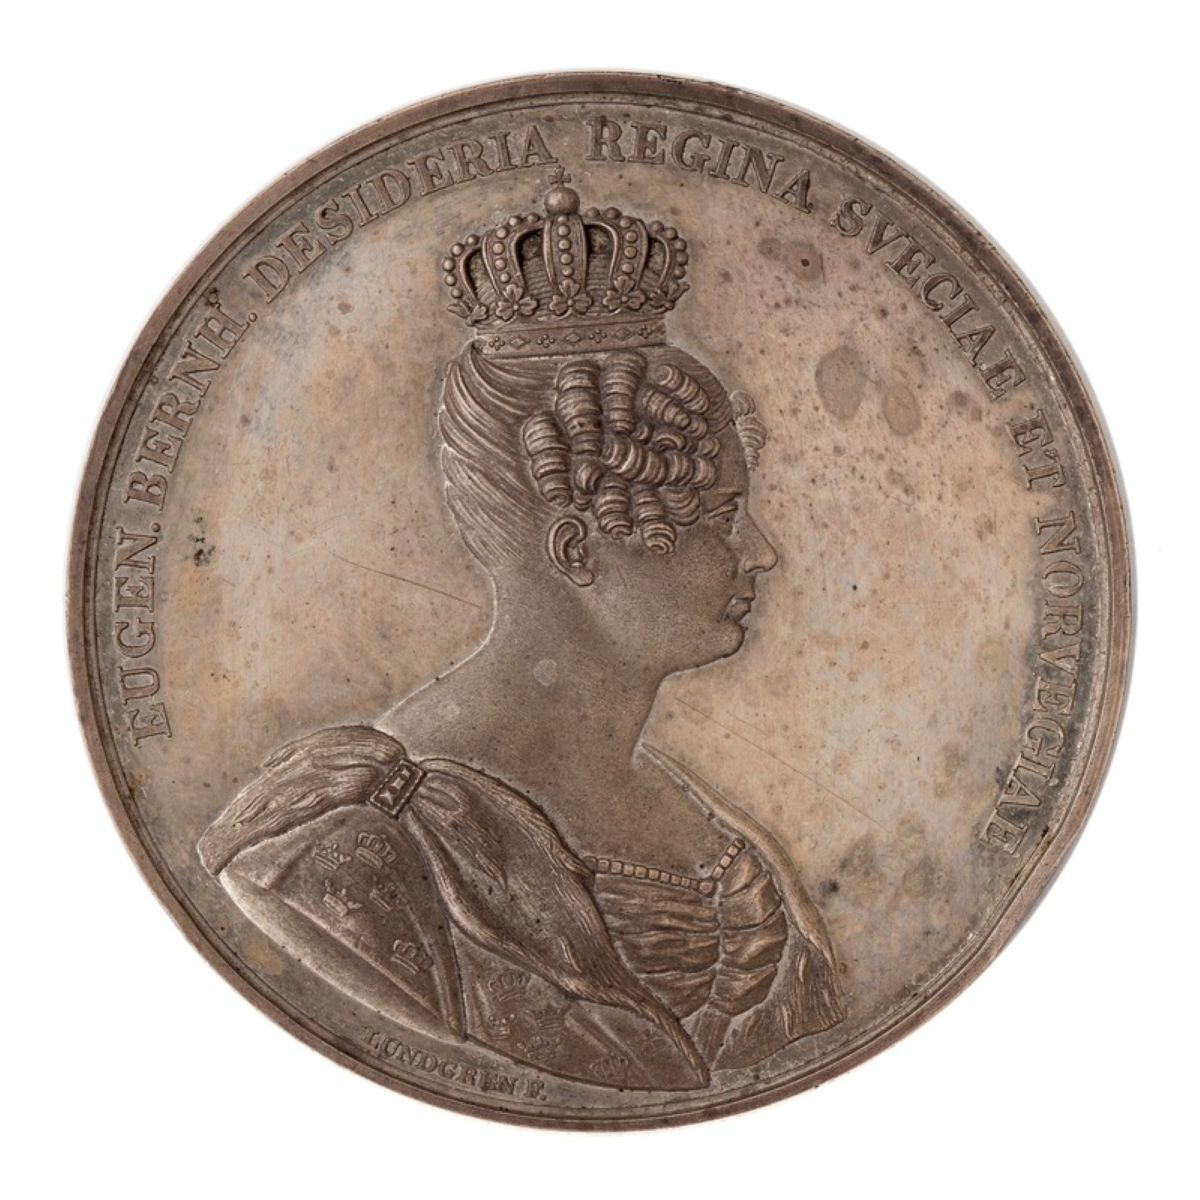 Queen Desideria of Sweden and Norway's coronation medal 1829.